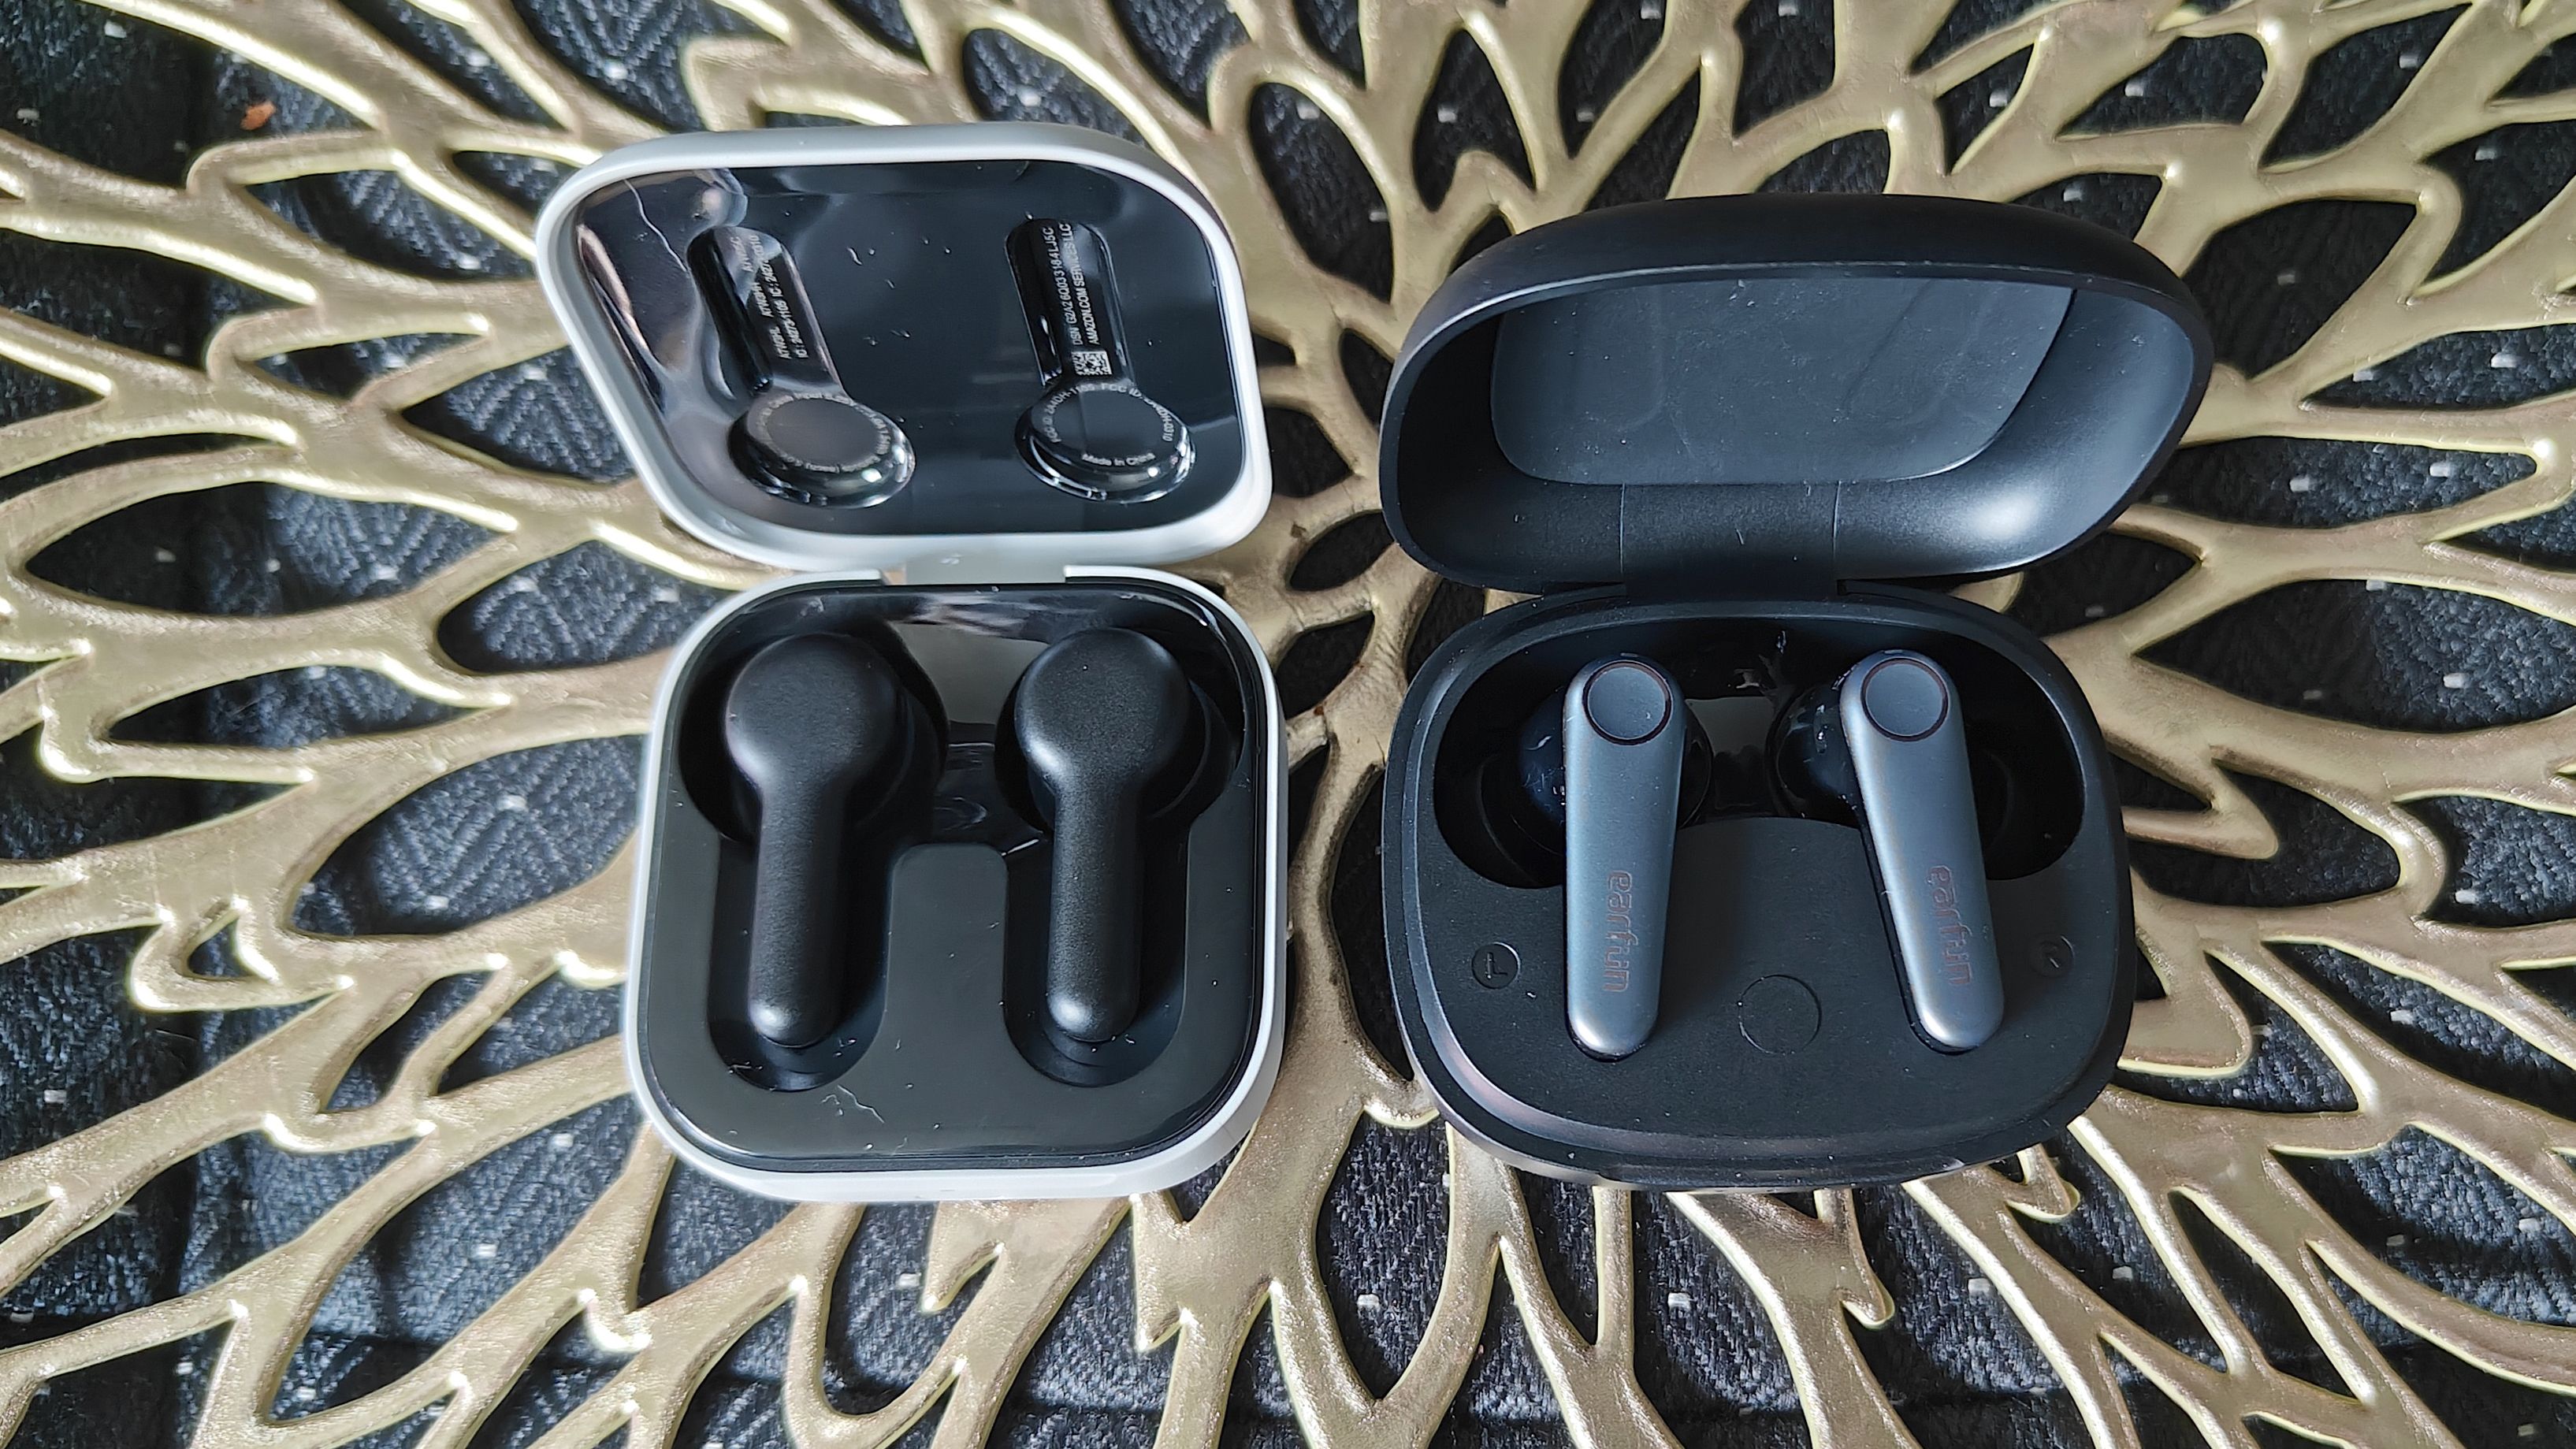 Echo Buds (2023) vs. EarFun Air Pro 3: which earbuds are